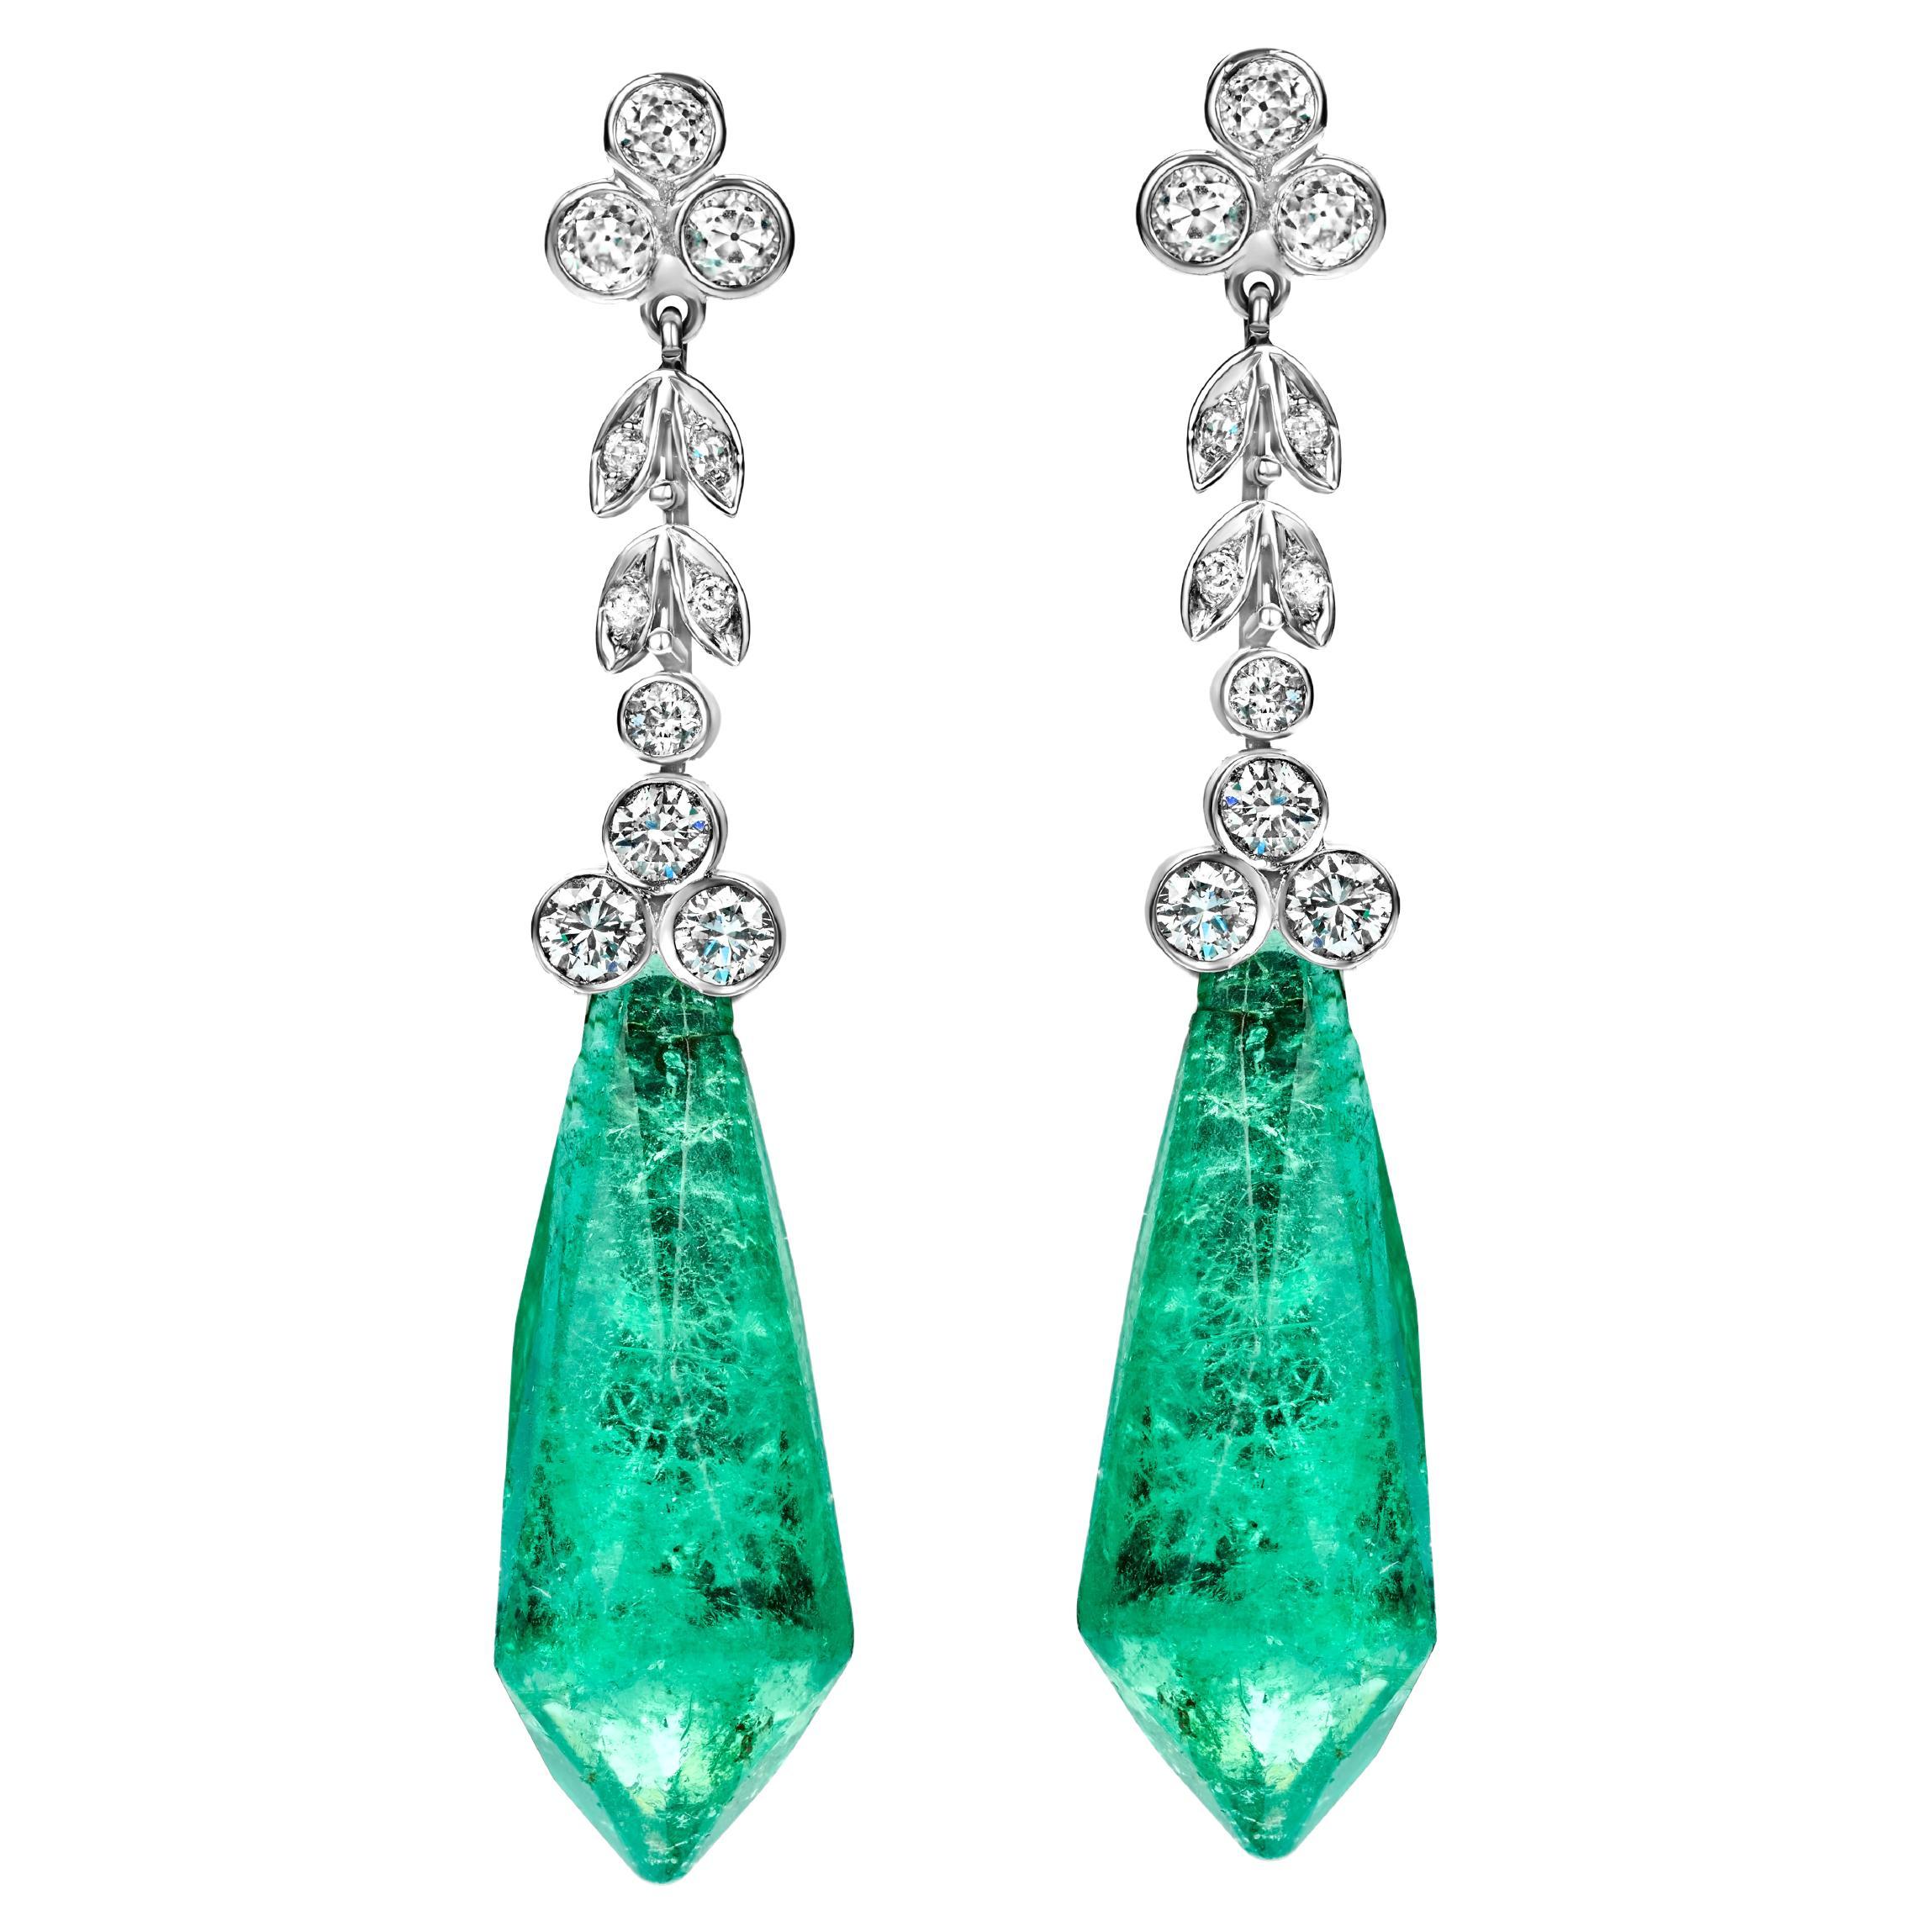 18kt White Gold Dangling Earrings with 32ct Emeralds and 1.46ct Diamonds, Estate